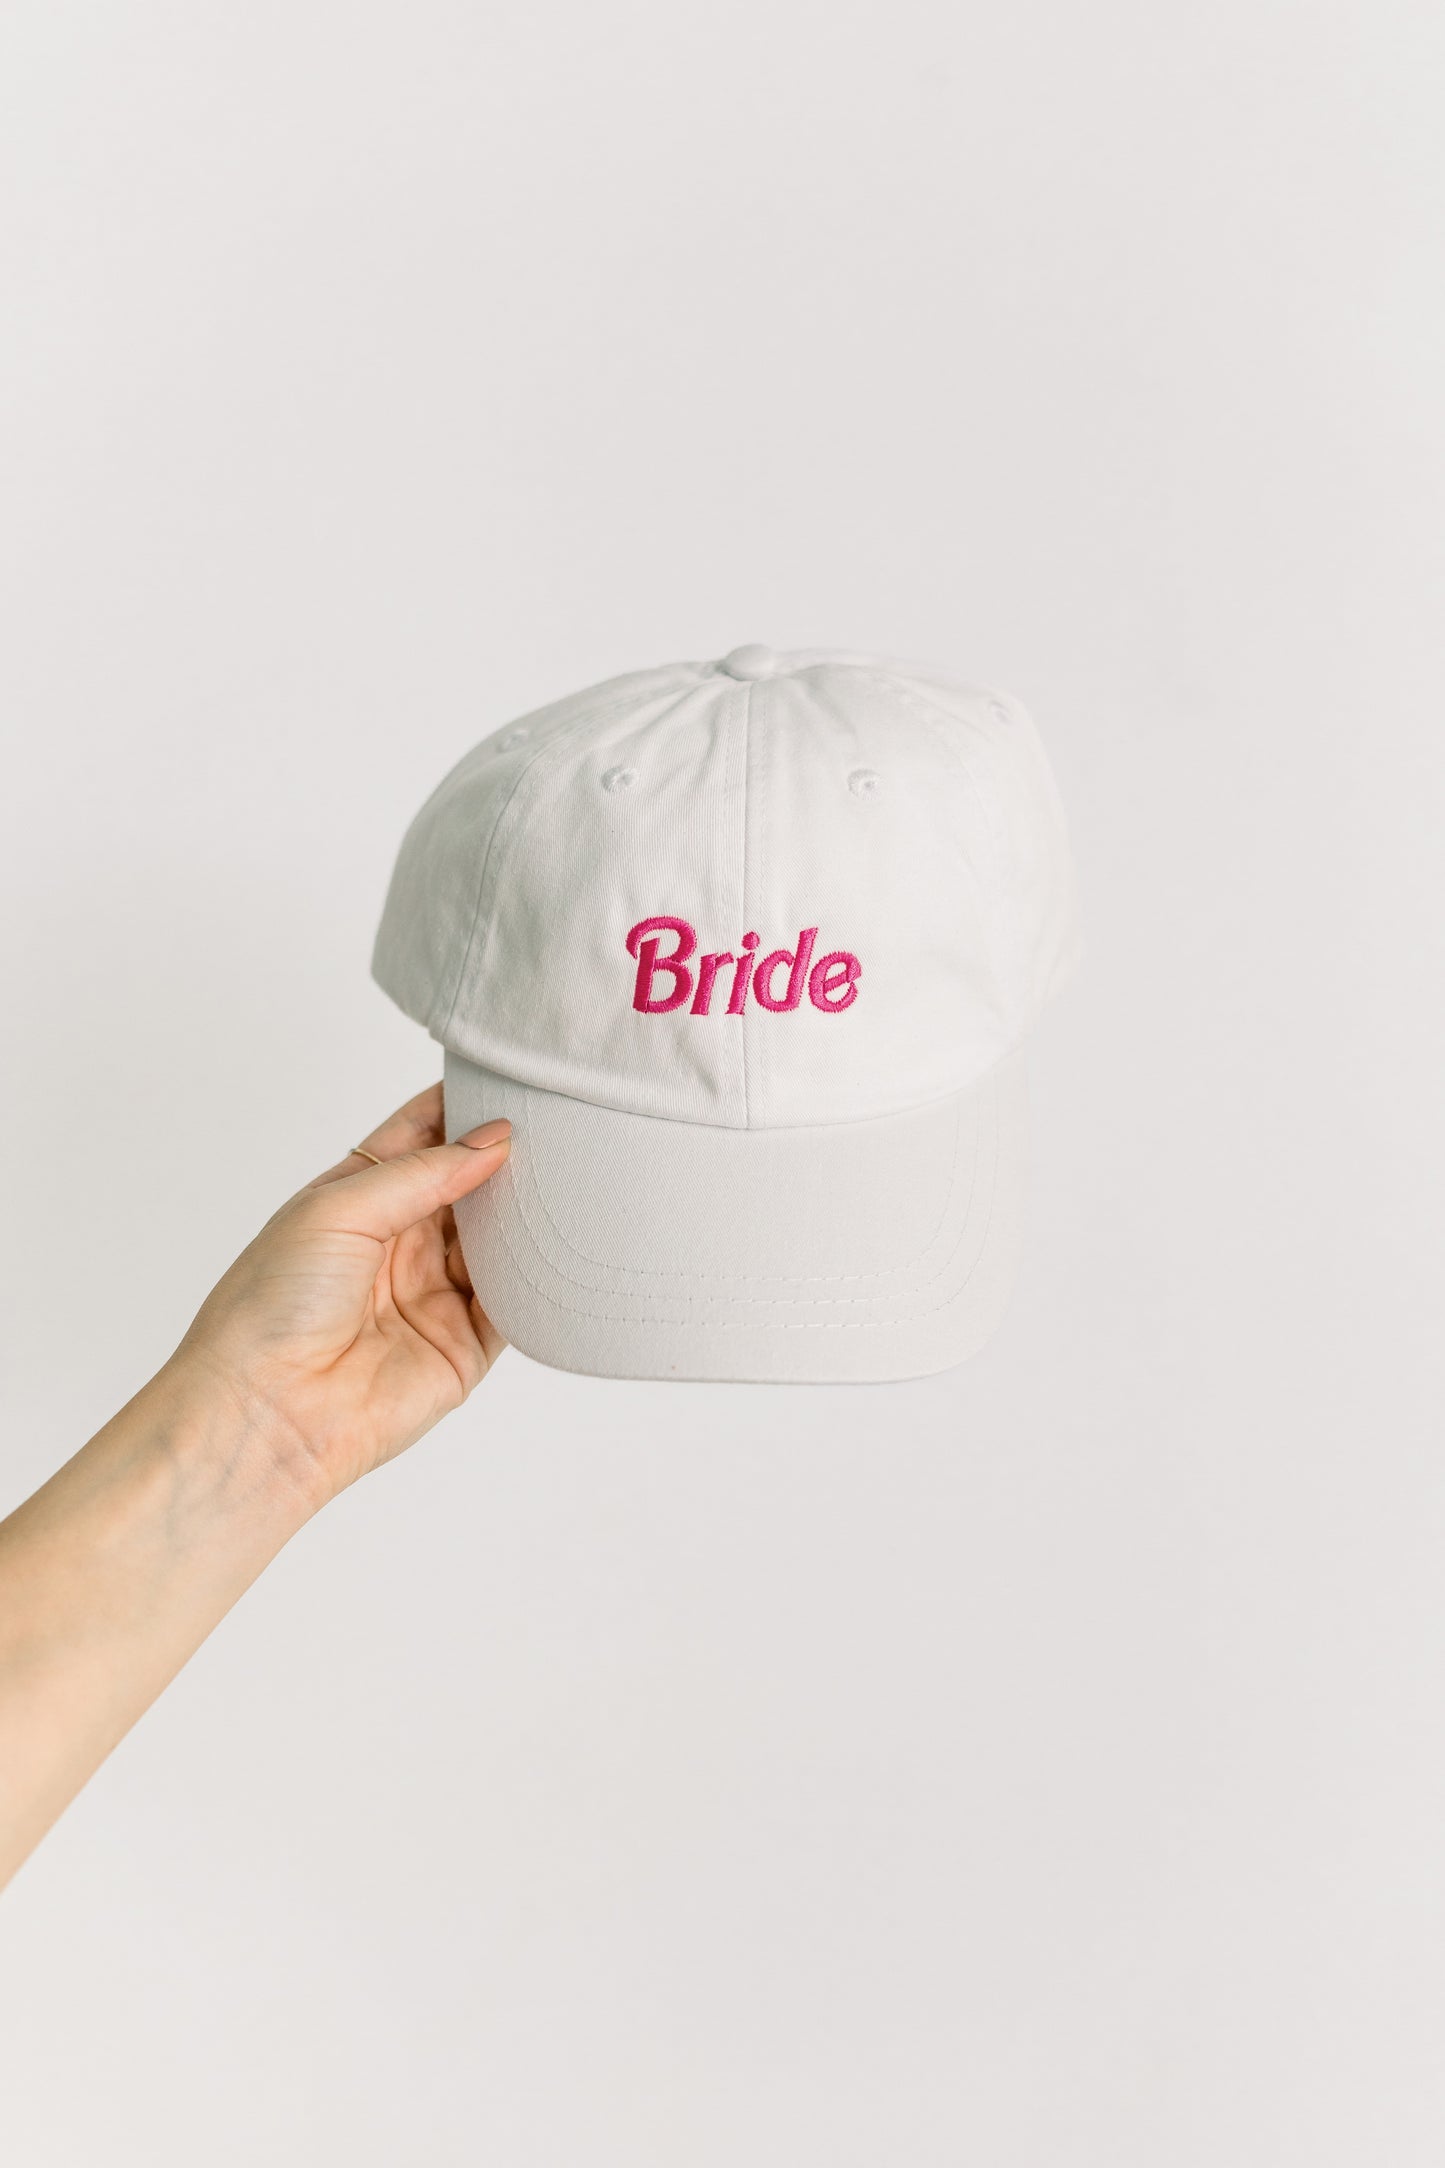 Bride Embroidered Pigment-Dyed Baseball Cap (Barbie Font) - Adult Unisex